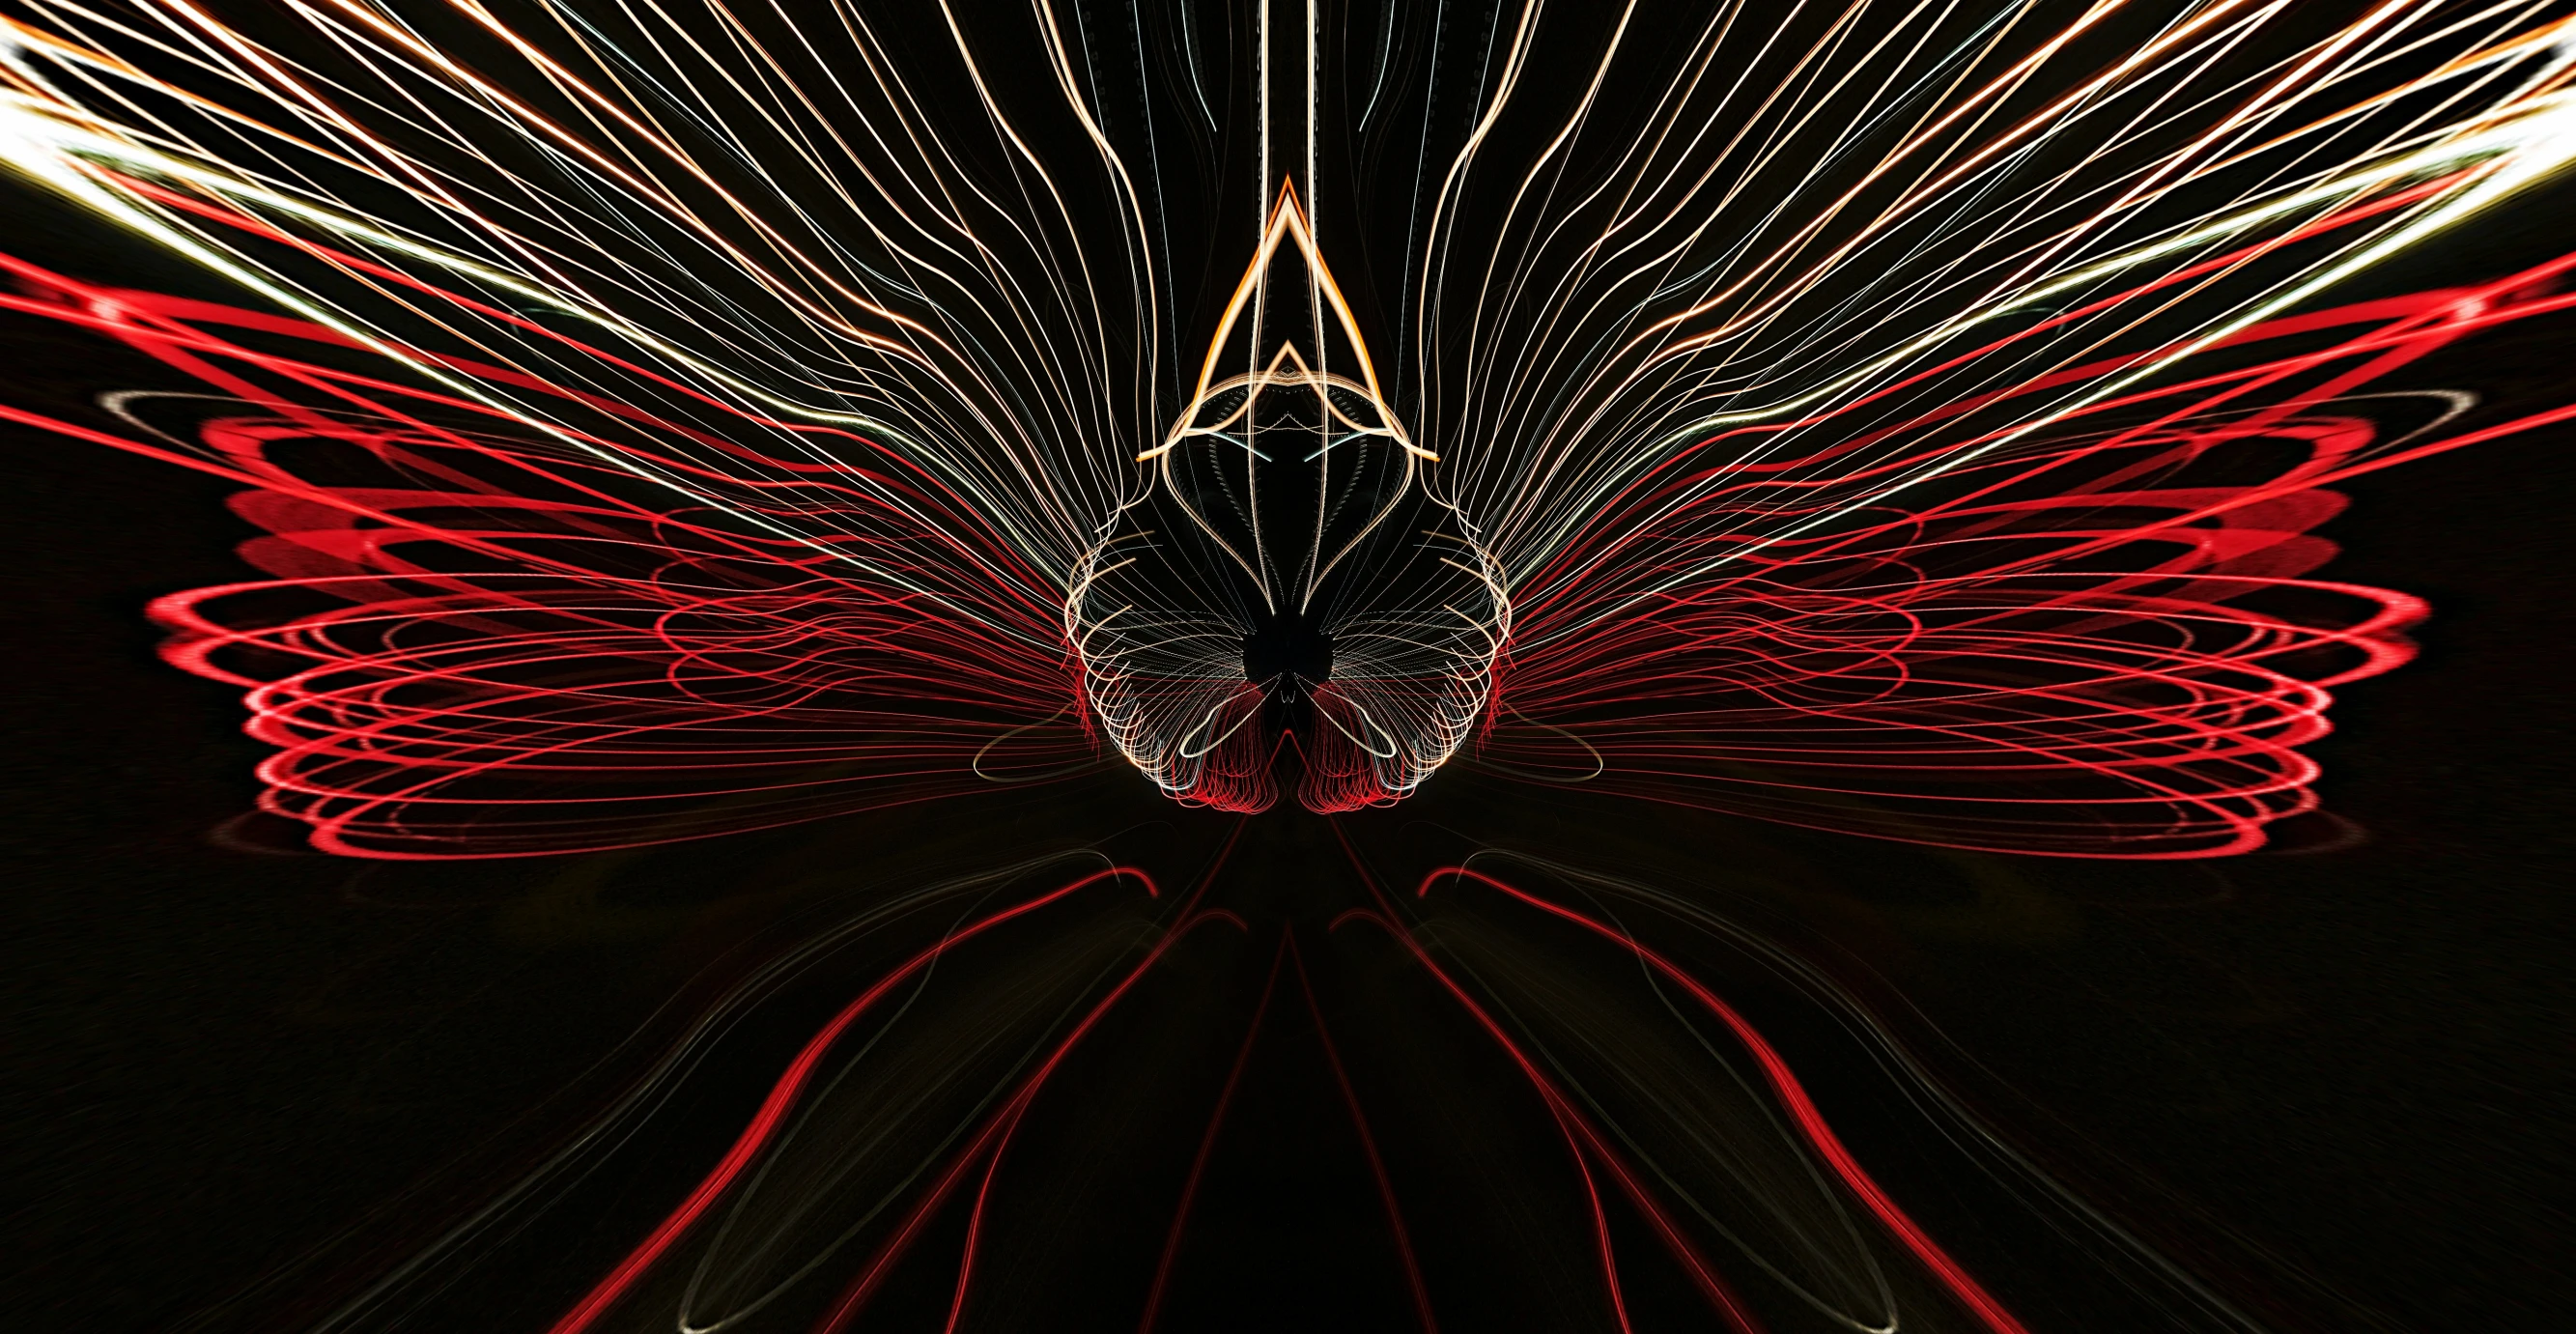 bright red lines form an abstract pograph against a black background